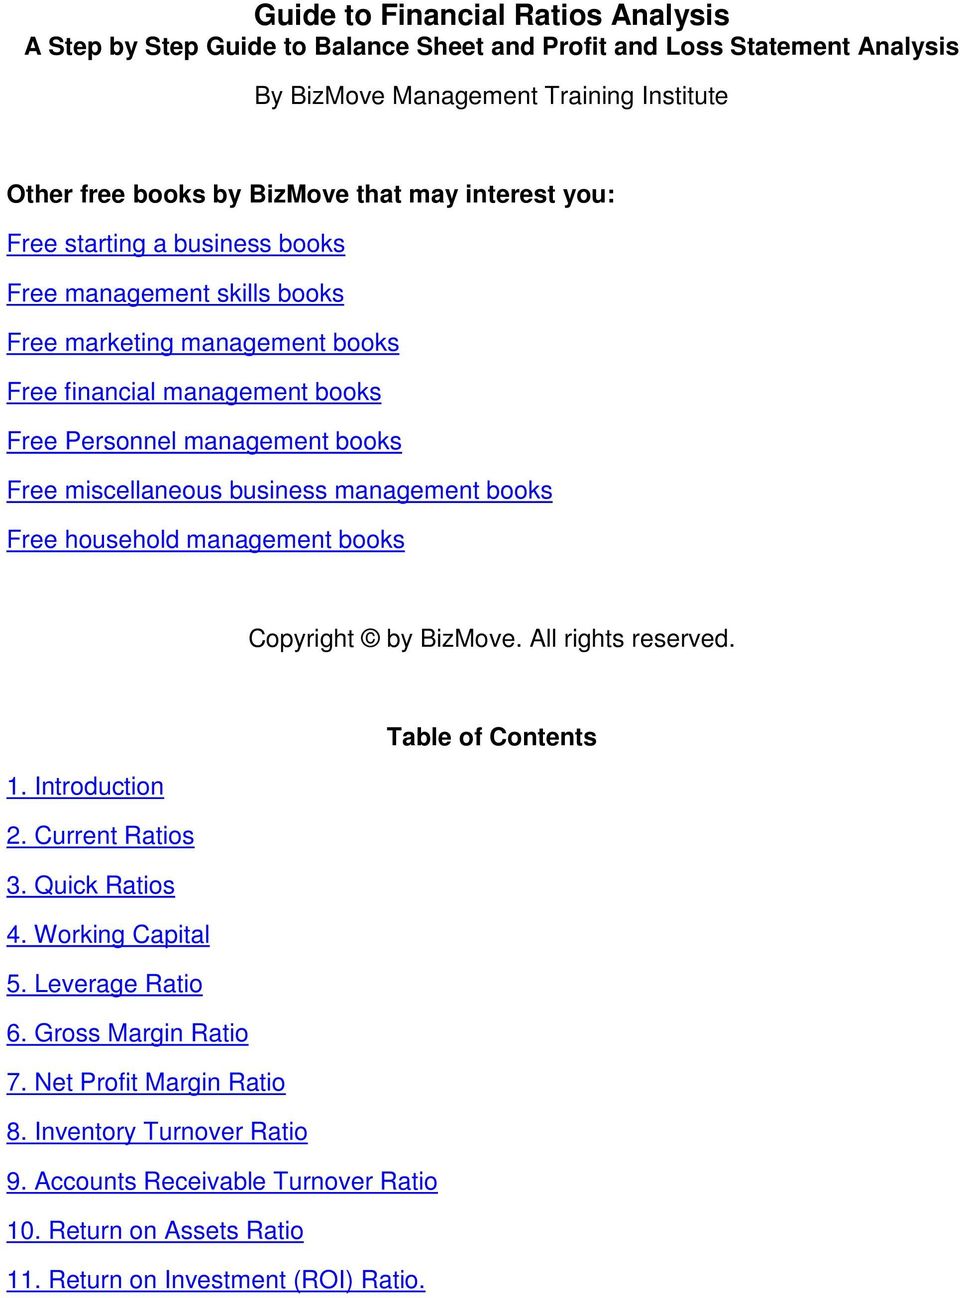 business management books Free household management books Copyright by BizMove. All rights reserved. Table of Contents 1. Introduction 2. Current Ratios 3. Quick Ratios 4. Working Capital 5.